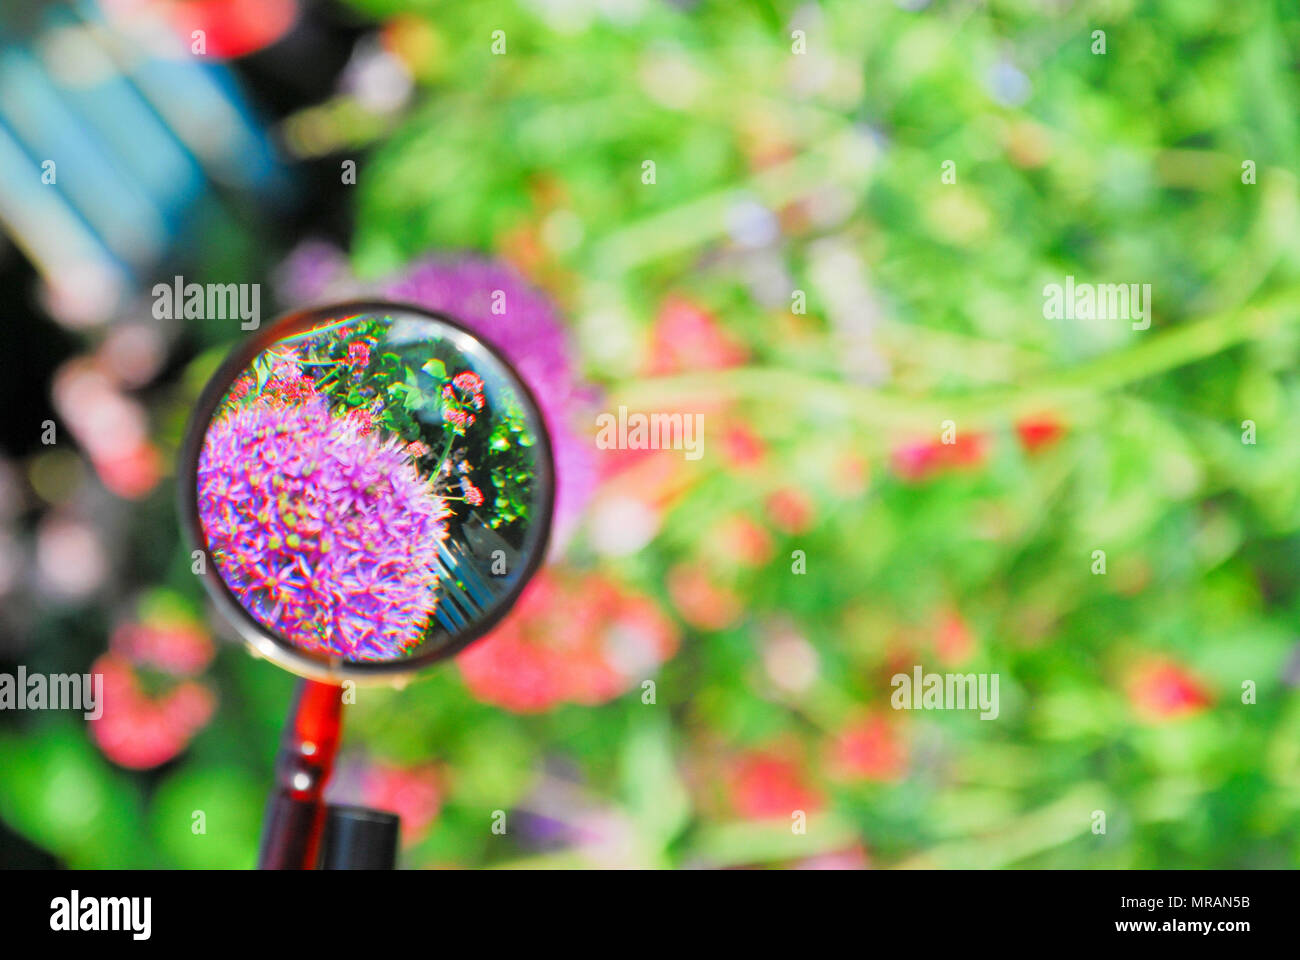 Portland. 26 May 2018. A head of allium in a sunny Portland garden is brought into sharp relief when seen through a magnifying glass Credit: stuart fretwell/Alamy Live News Stock Photo